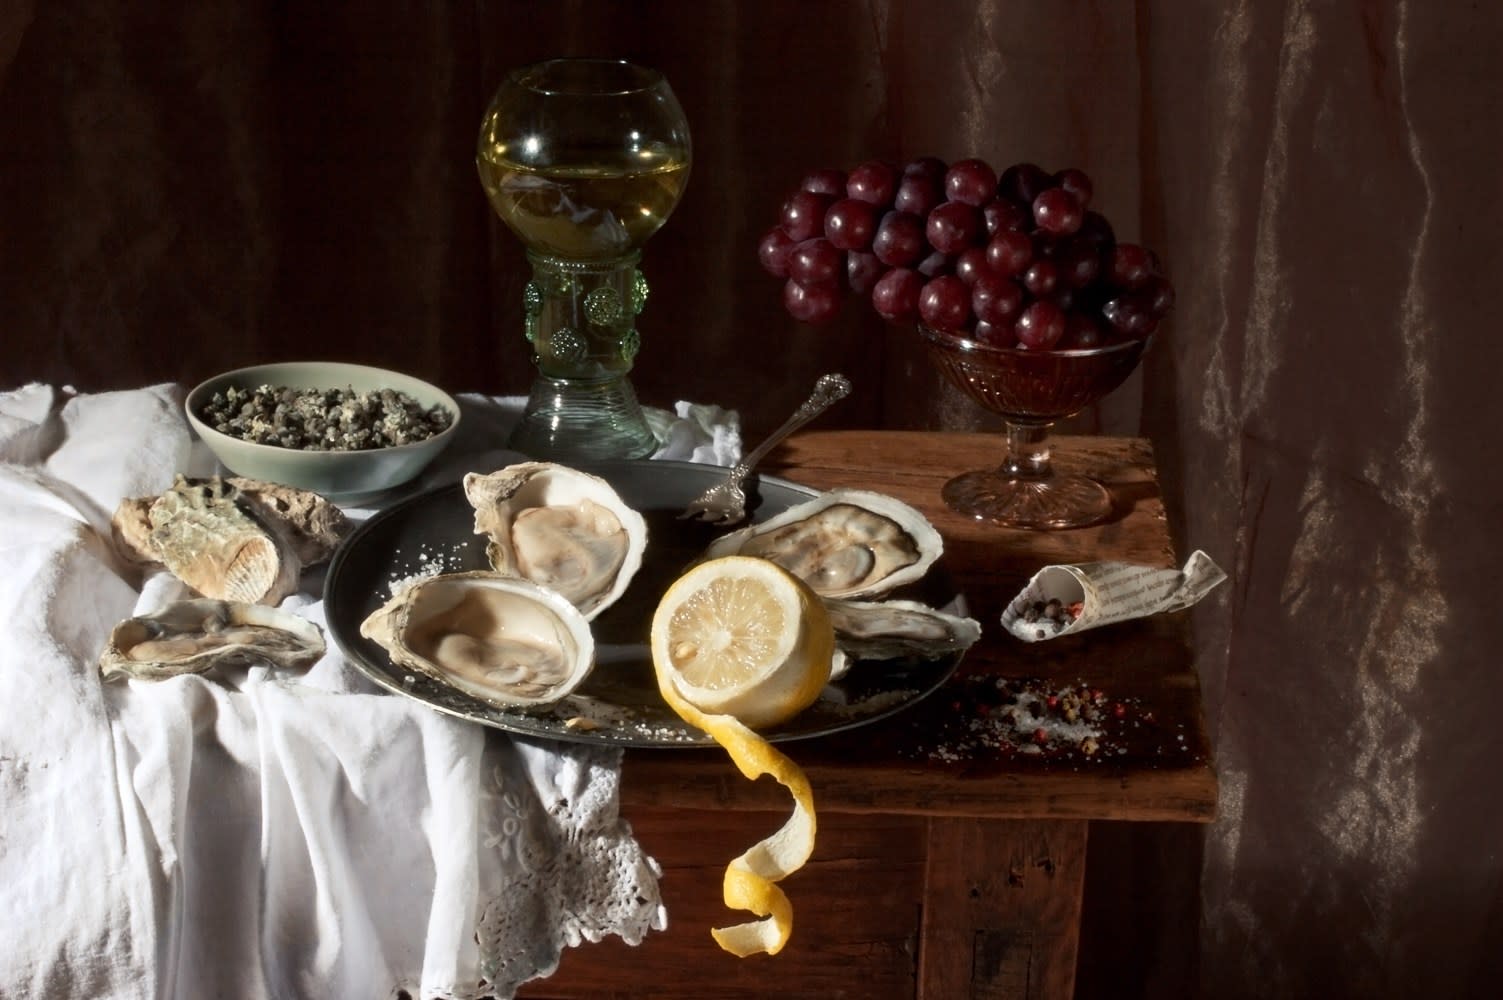 Paulette Tavormina, Oysters, After W.C.H., 2008